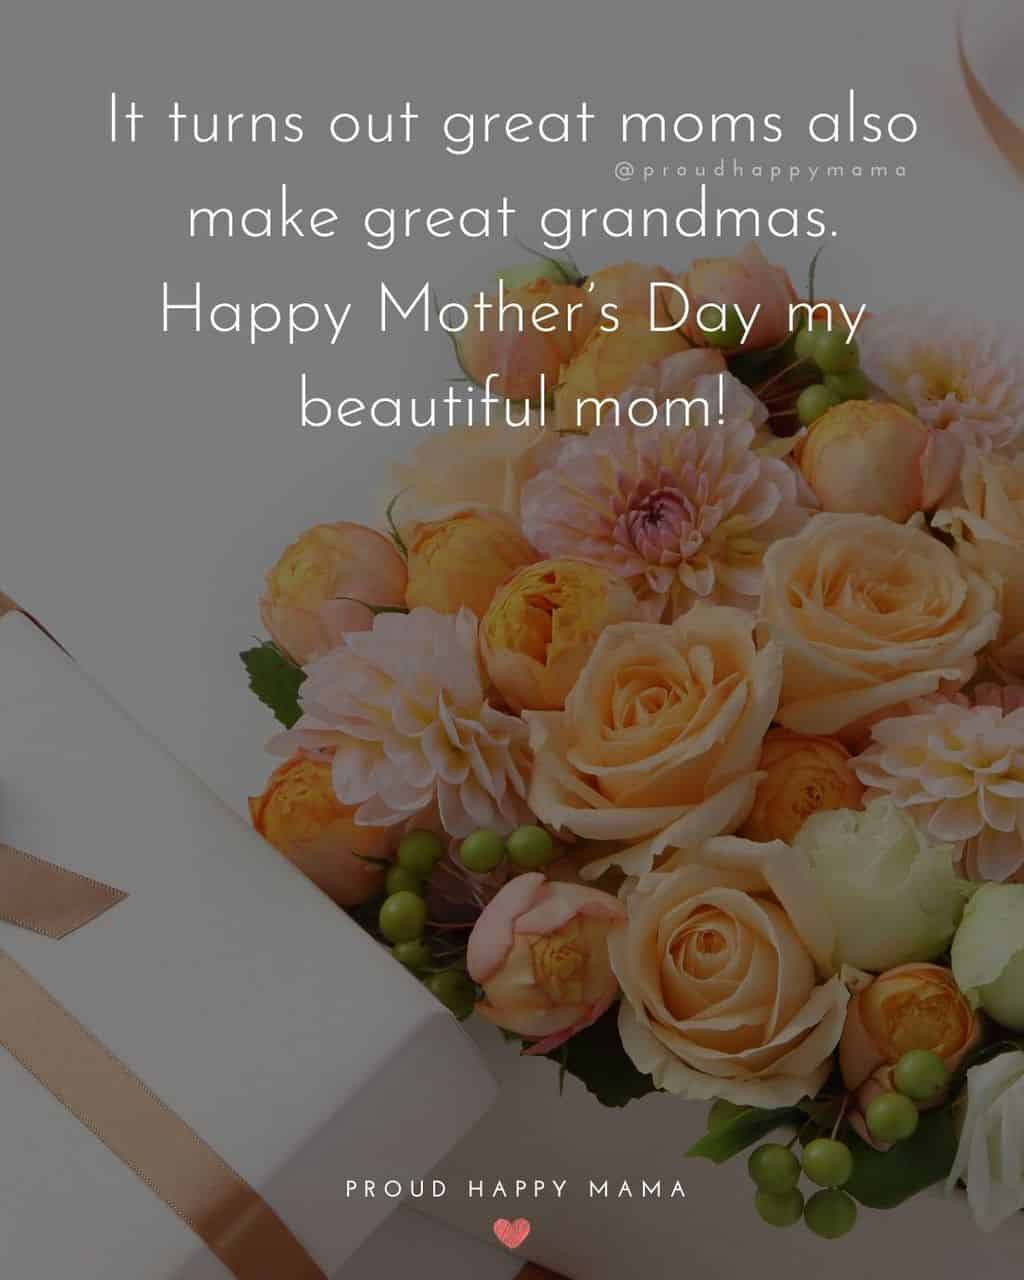 Happy Mothers Day Quotes To Grandma - It turns out great moms also make great grandmas. Happy Mother’s Day my